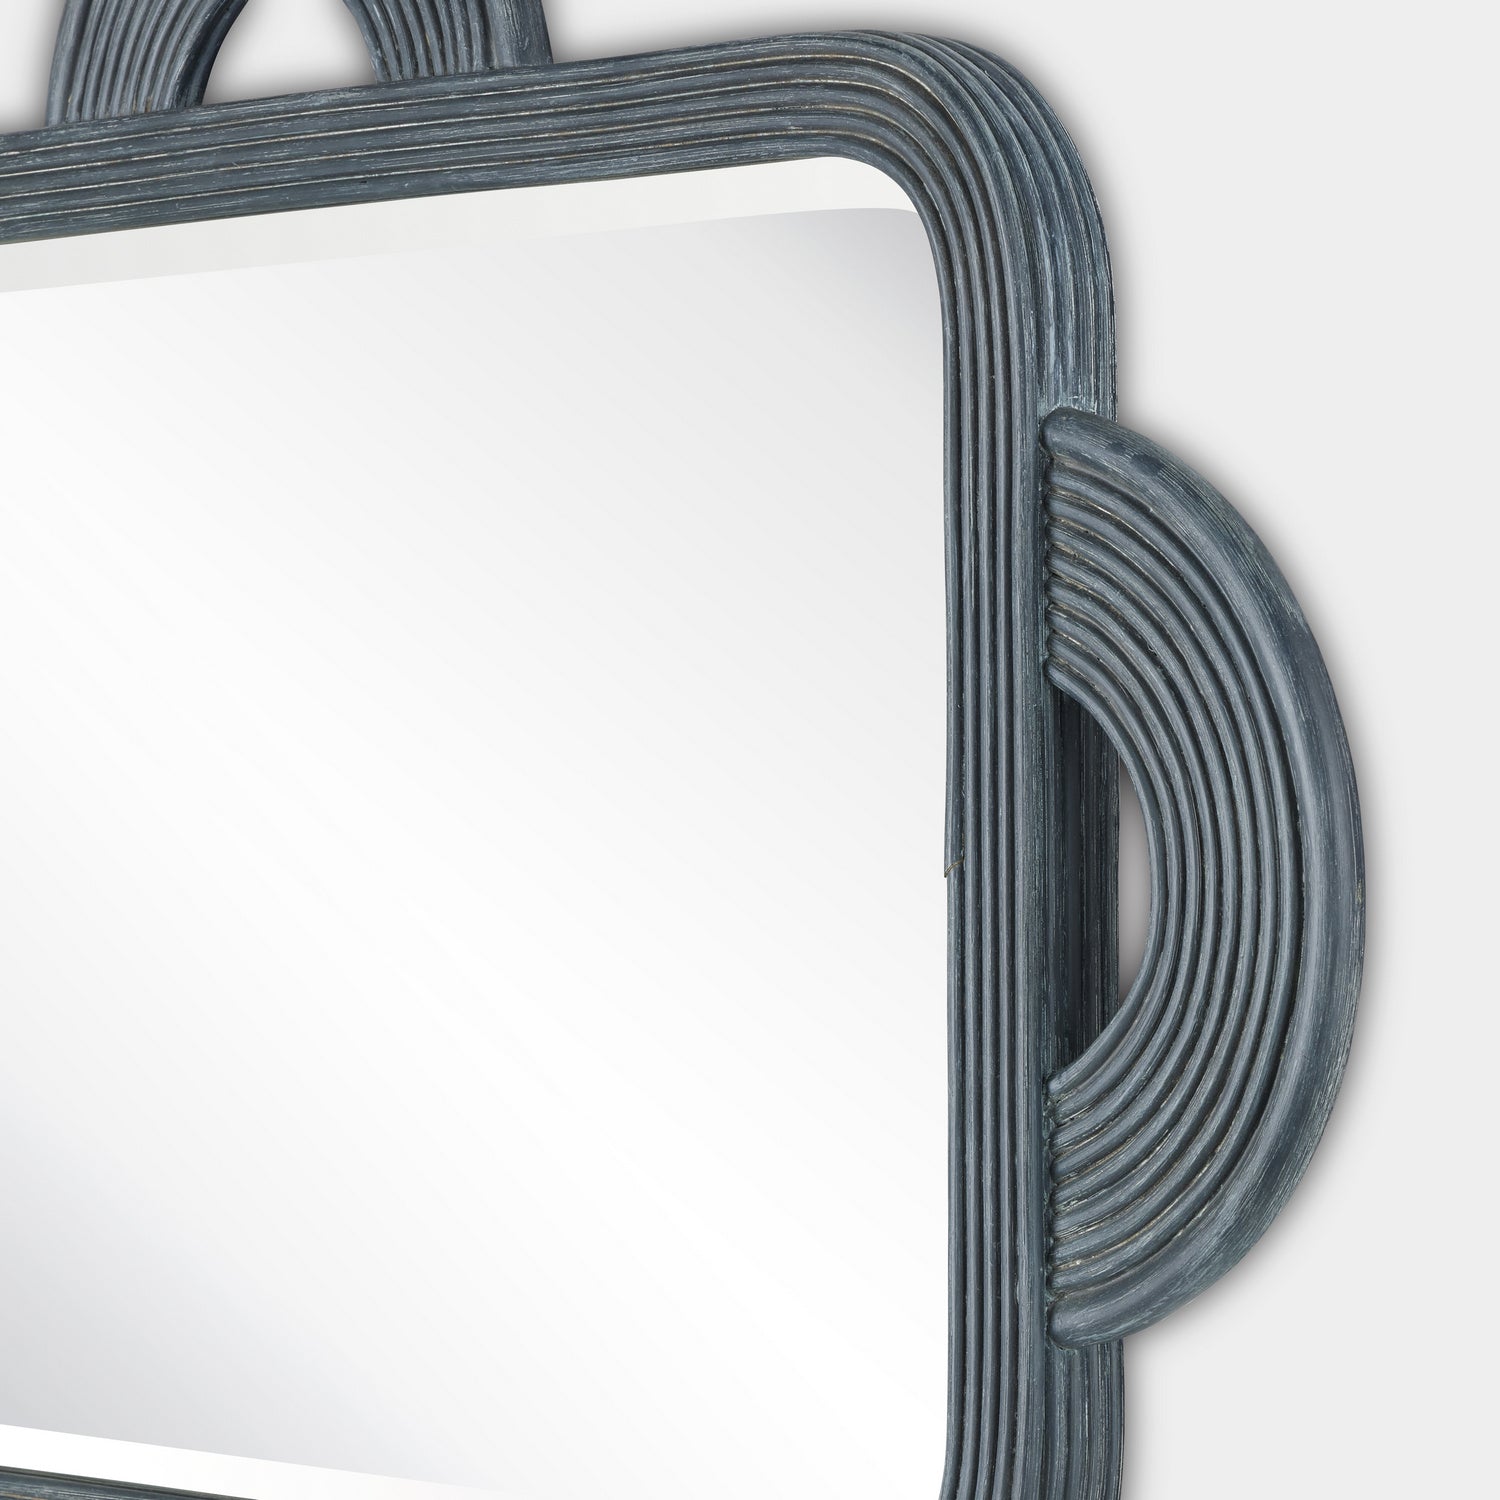 Mirror from the Santos collection in Vintage Navy/Mirror finish